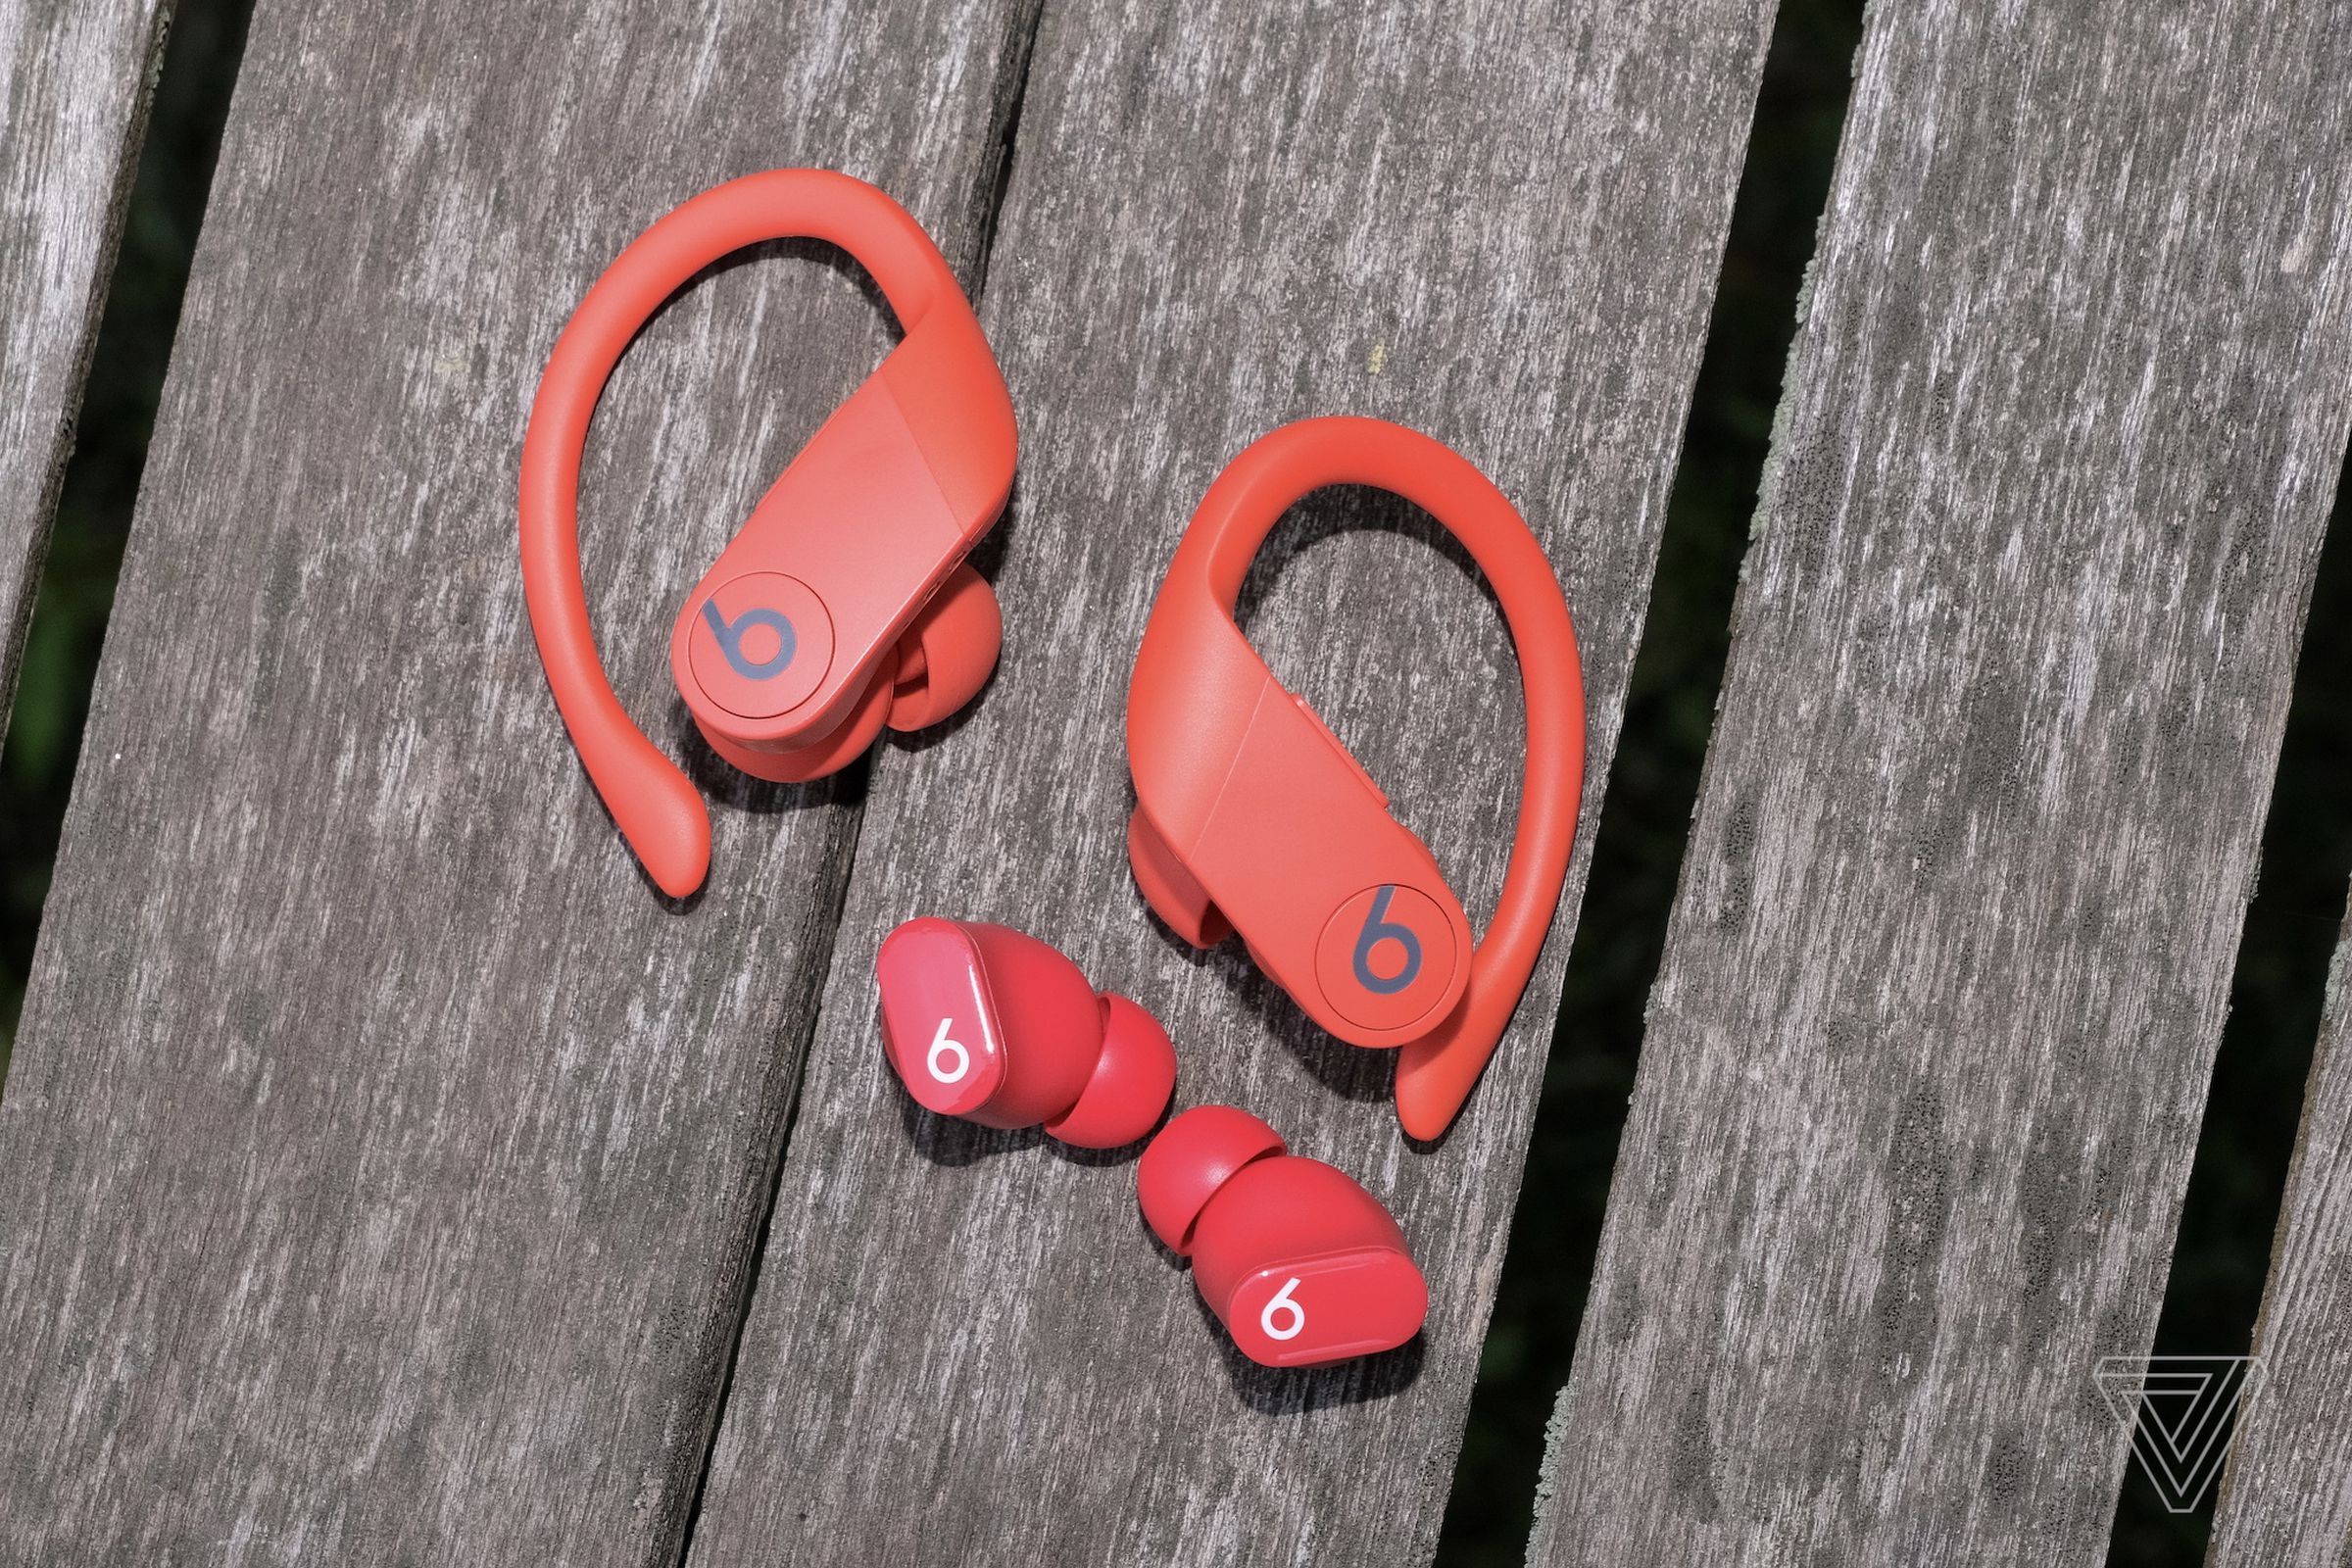 The Beats Studio Buds are much smaller than the previous Powerbeats Pro.